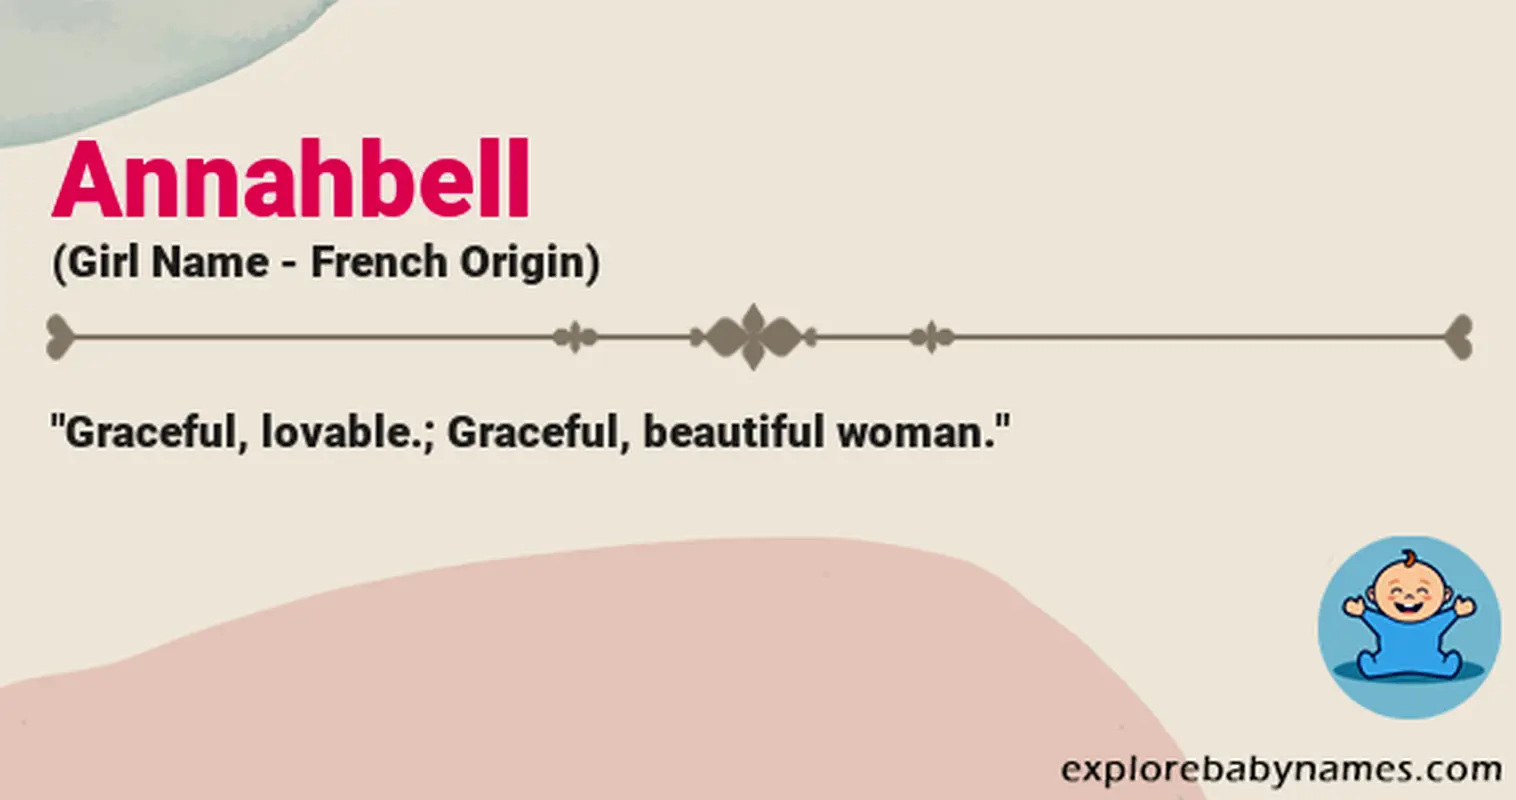 Meaning of Annahbell